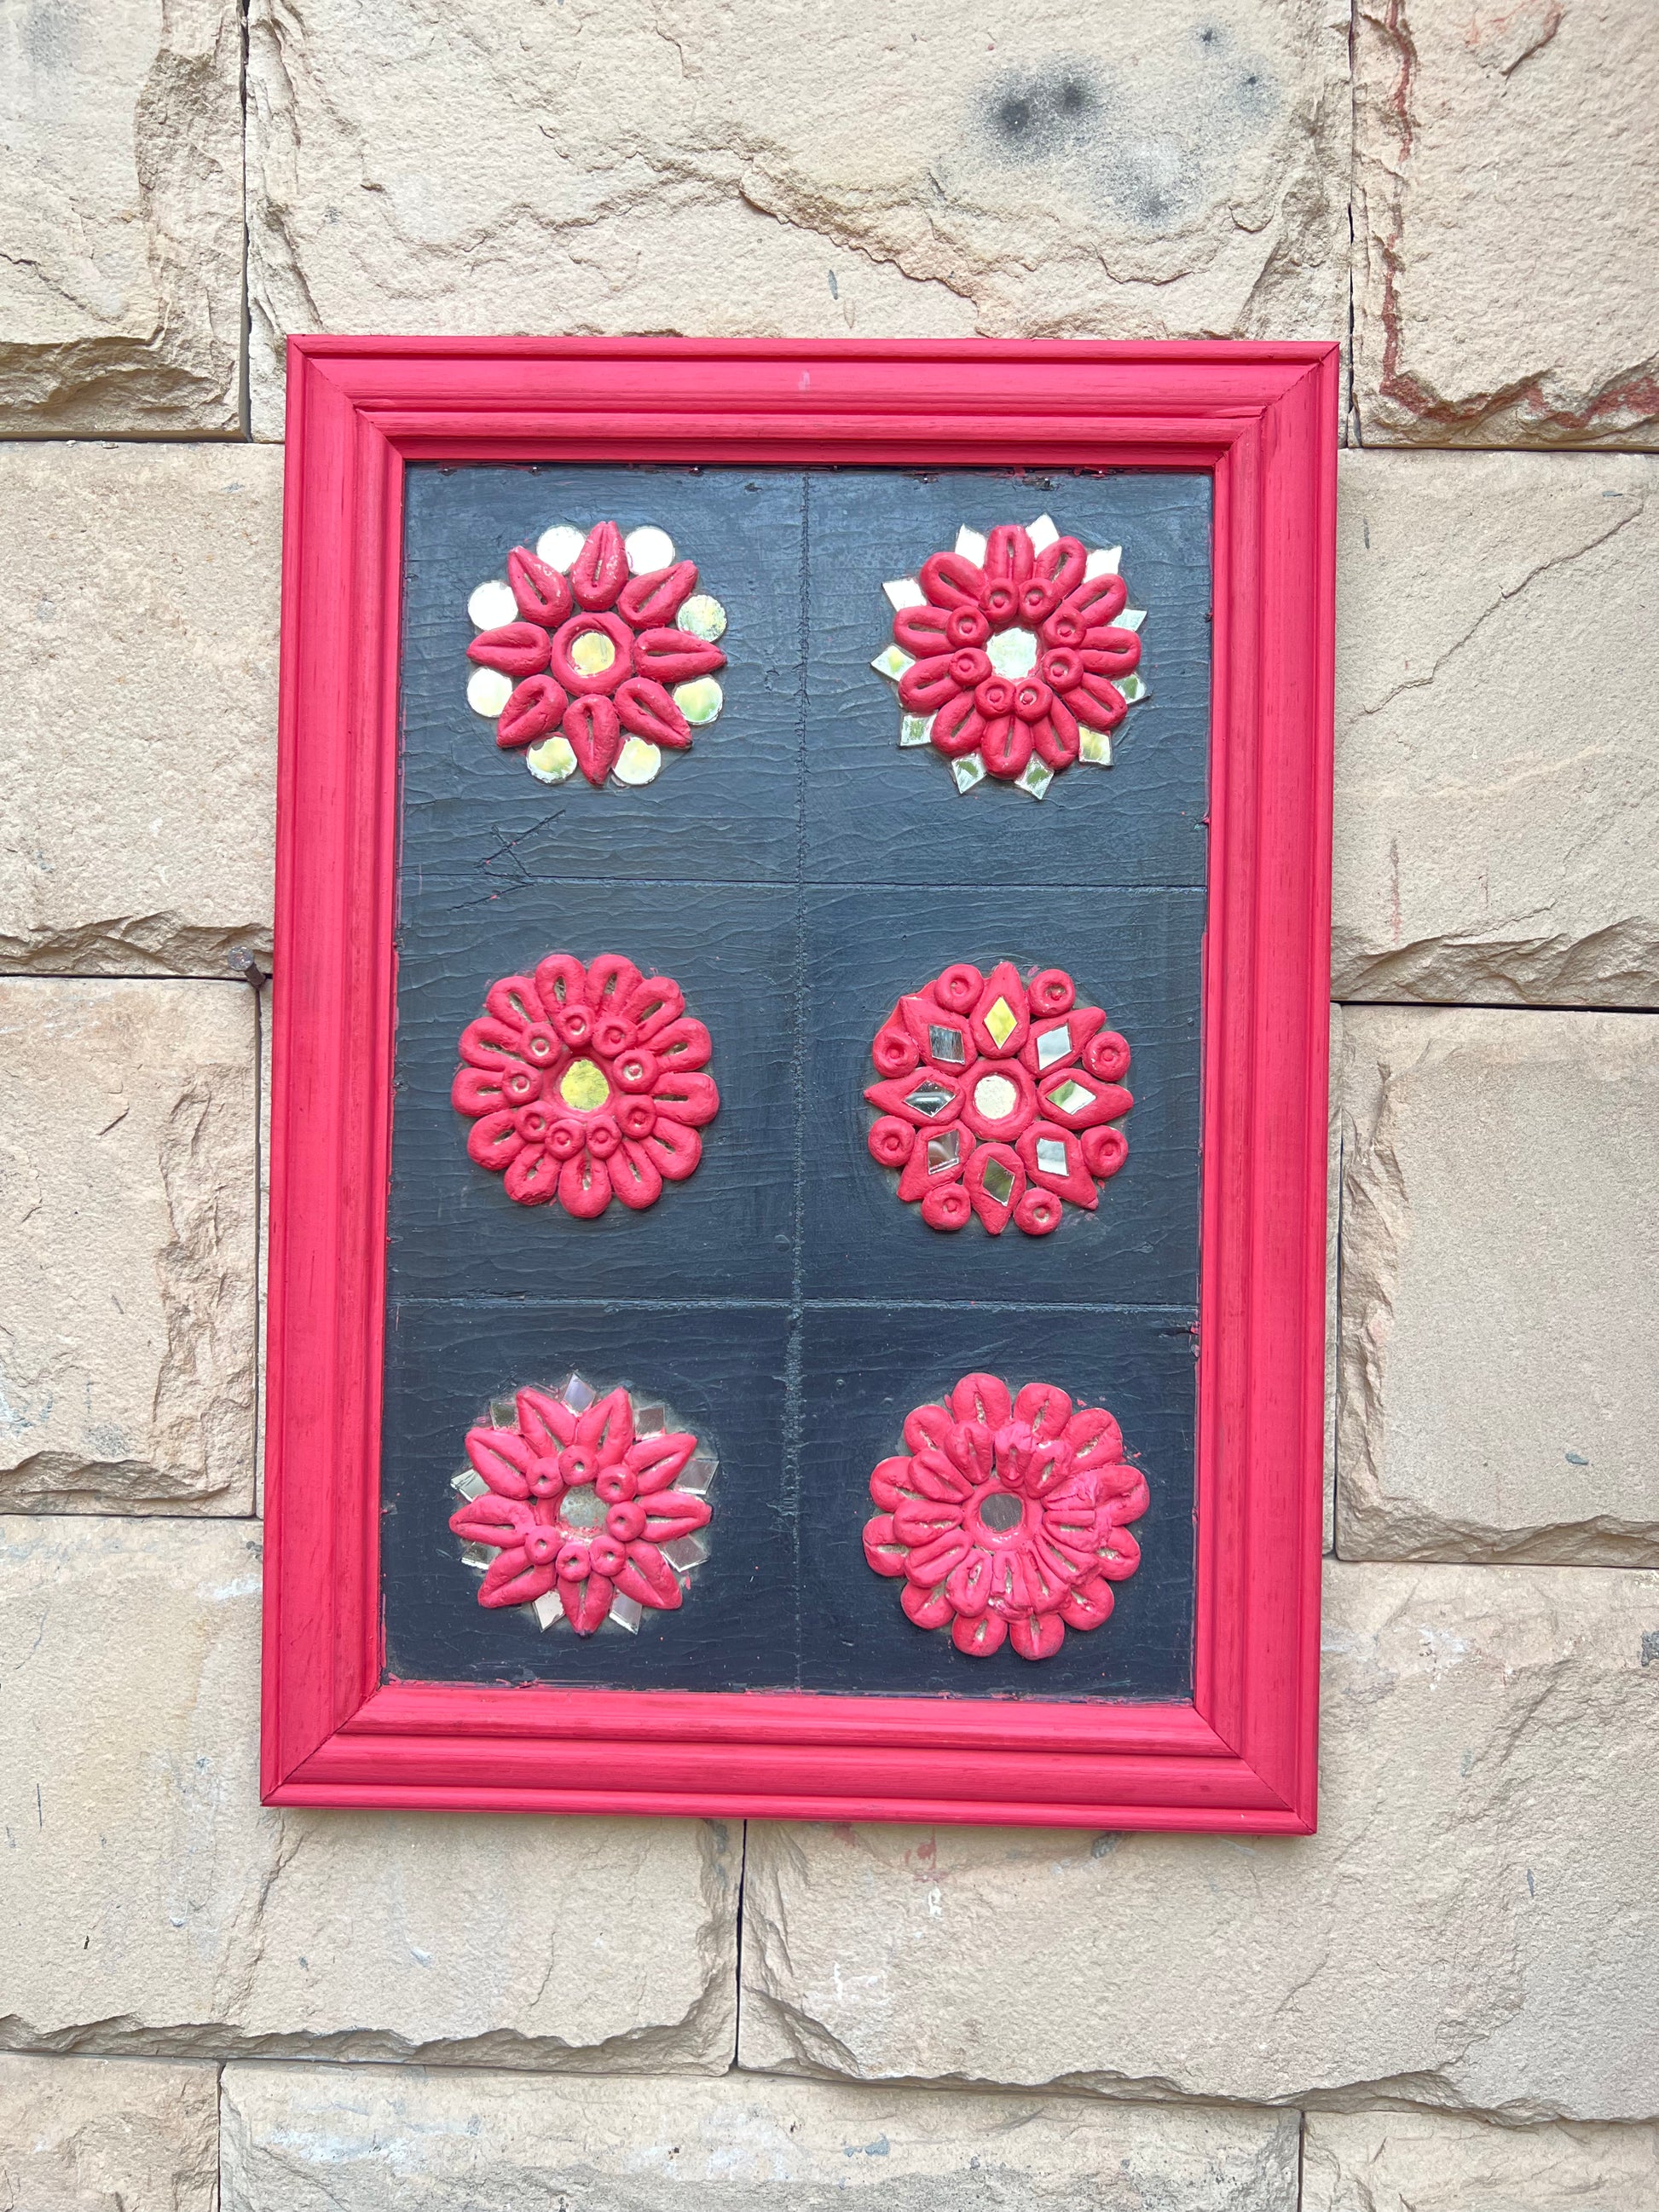 Image of Elegant and Traditional Pink Panel with Clay Flower Work  The Source India is an Indian Handicraft, Home Decor, Furnishing and Textiles Store. Based out of Hauz Khas Village New Delhi, each piece is carefully procured to allow the enhancement of India's Culture.